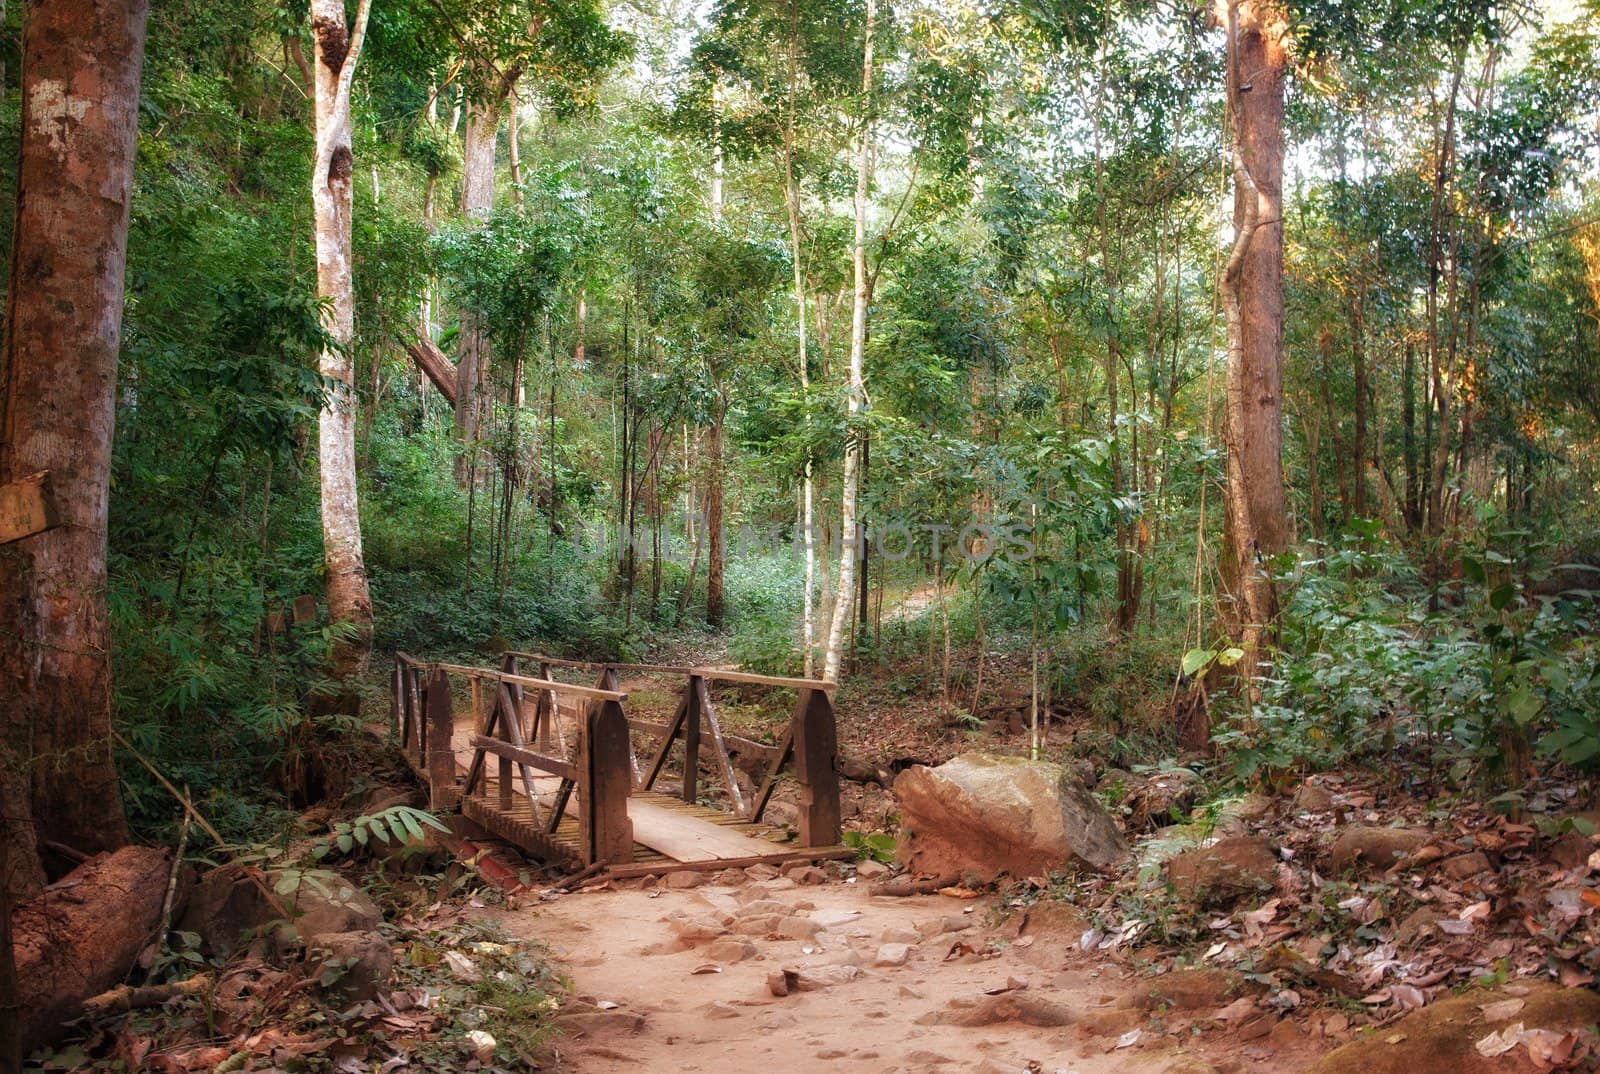 bridge crossing in the forest by clearviewstock